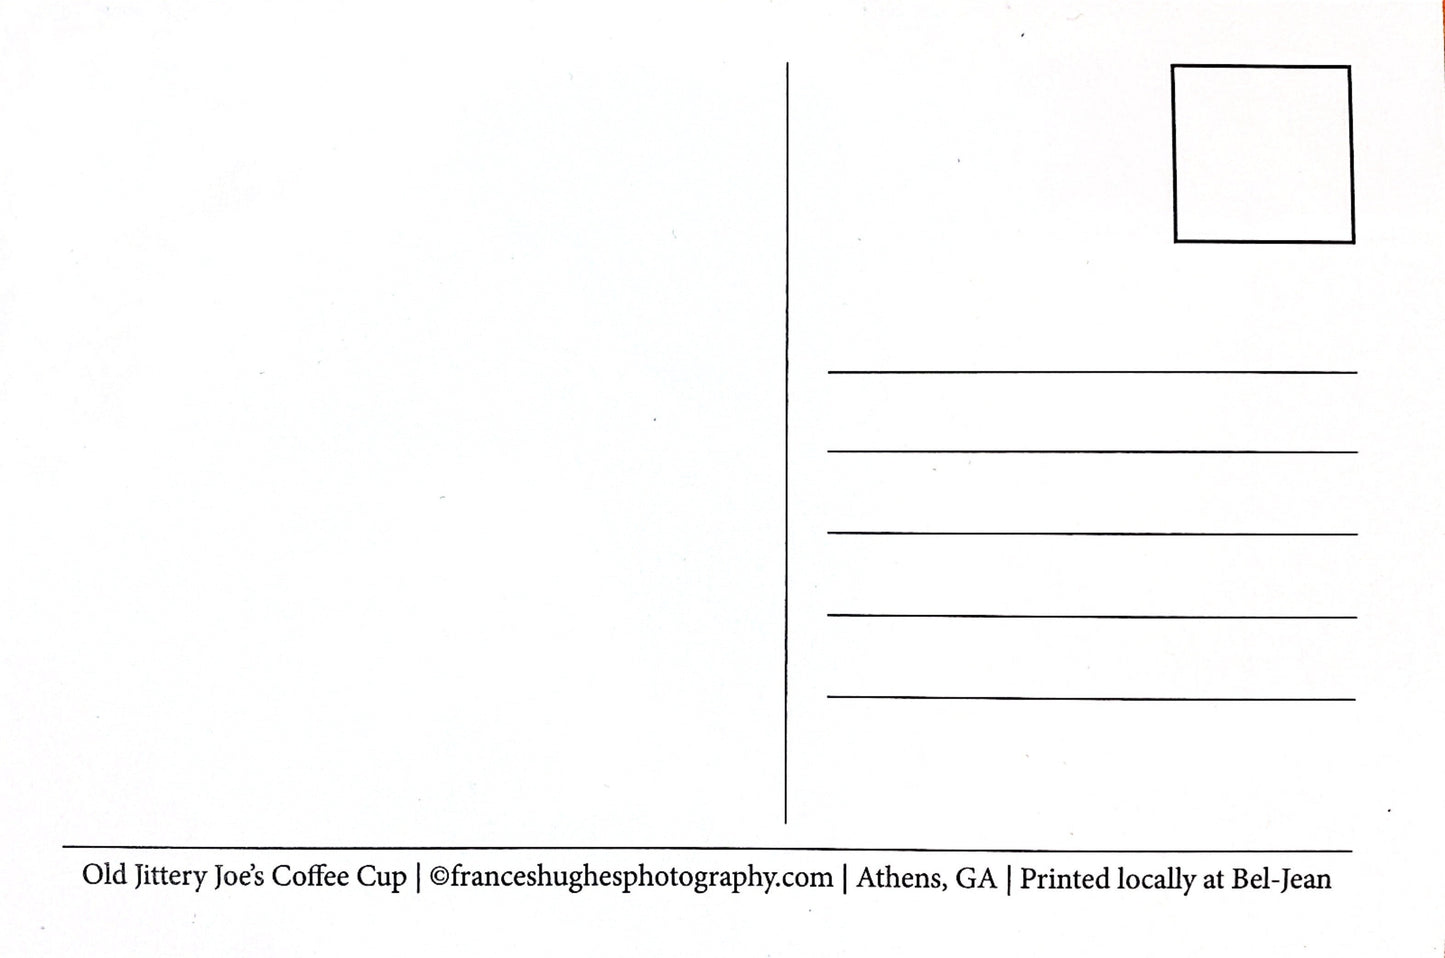 Athens, GA Postcards by Frances Hughes - Old Jittery Joe’s Roaster Coffee Cup - by Frances Hughes - K. A. Artist Shop